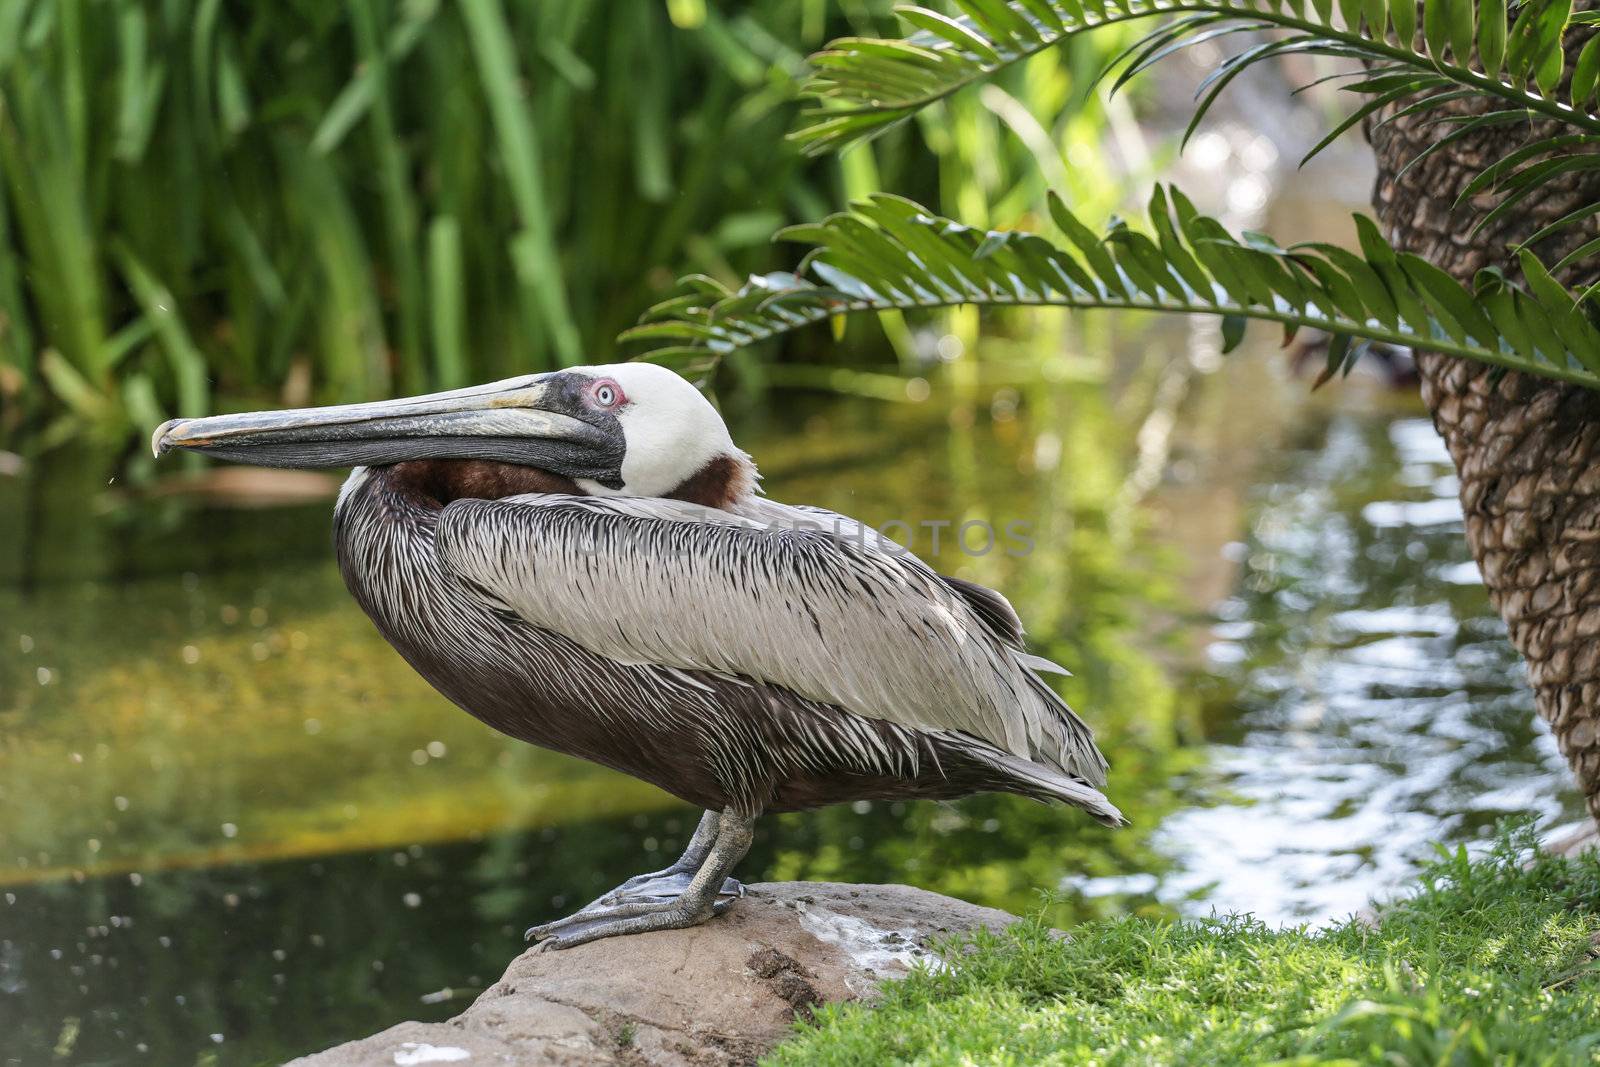 A pelican standing on a rock with its head tilted back by the side of a pond